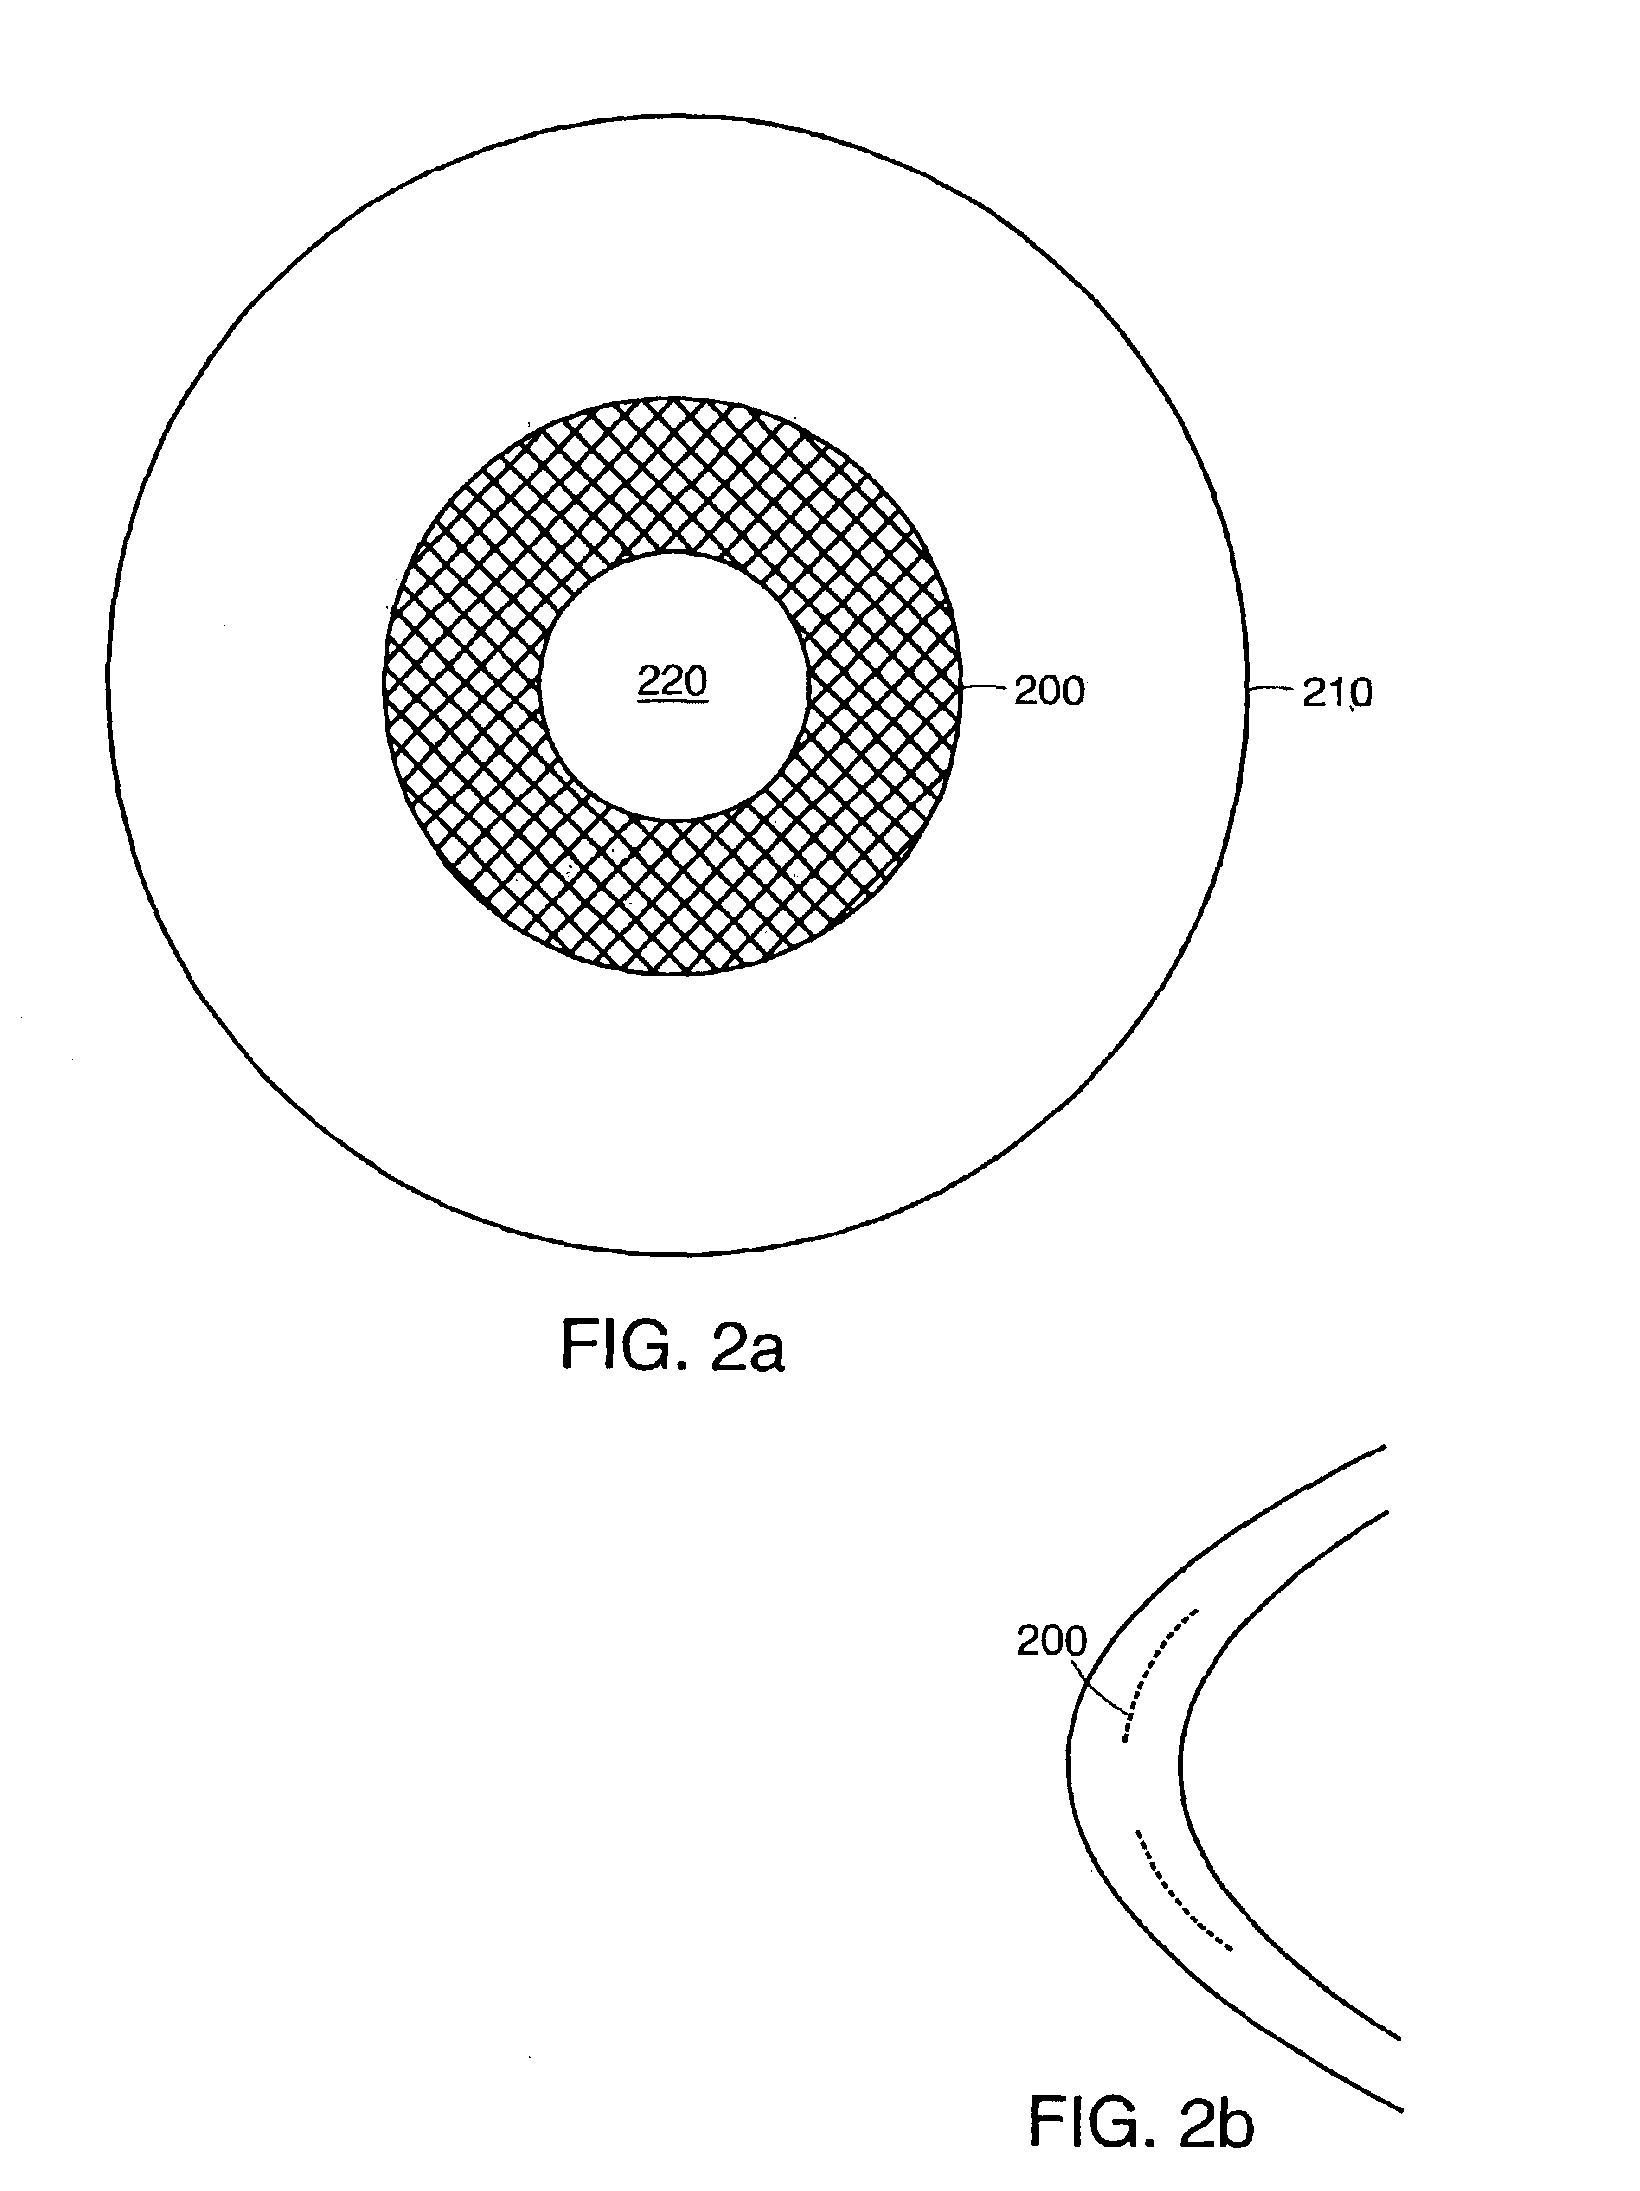 System and method for increasing the depth of focus of the human eye